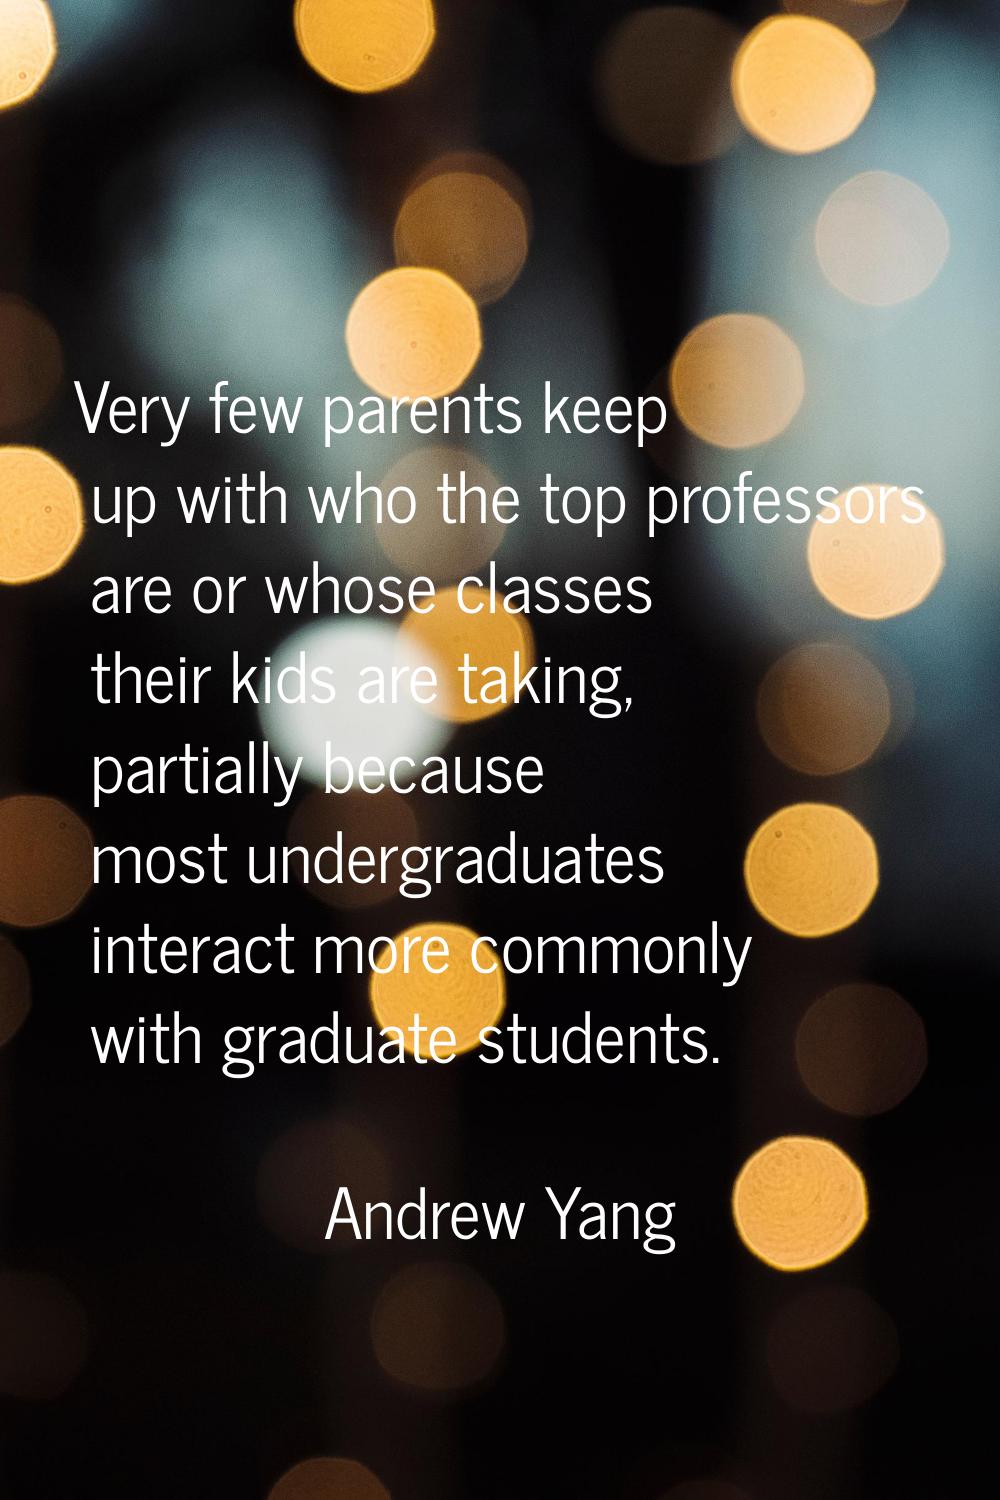 Very few parents keep up with who the top professors are or whose classes their kids are taking, pa